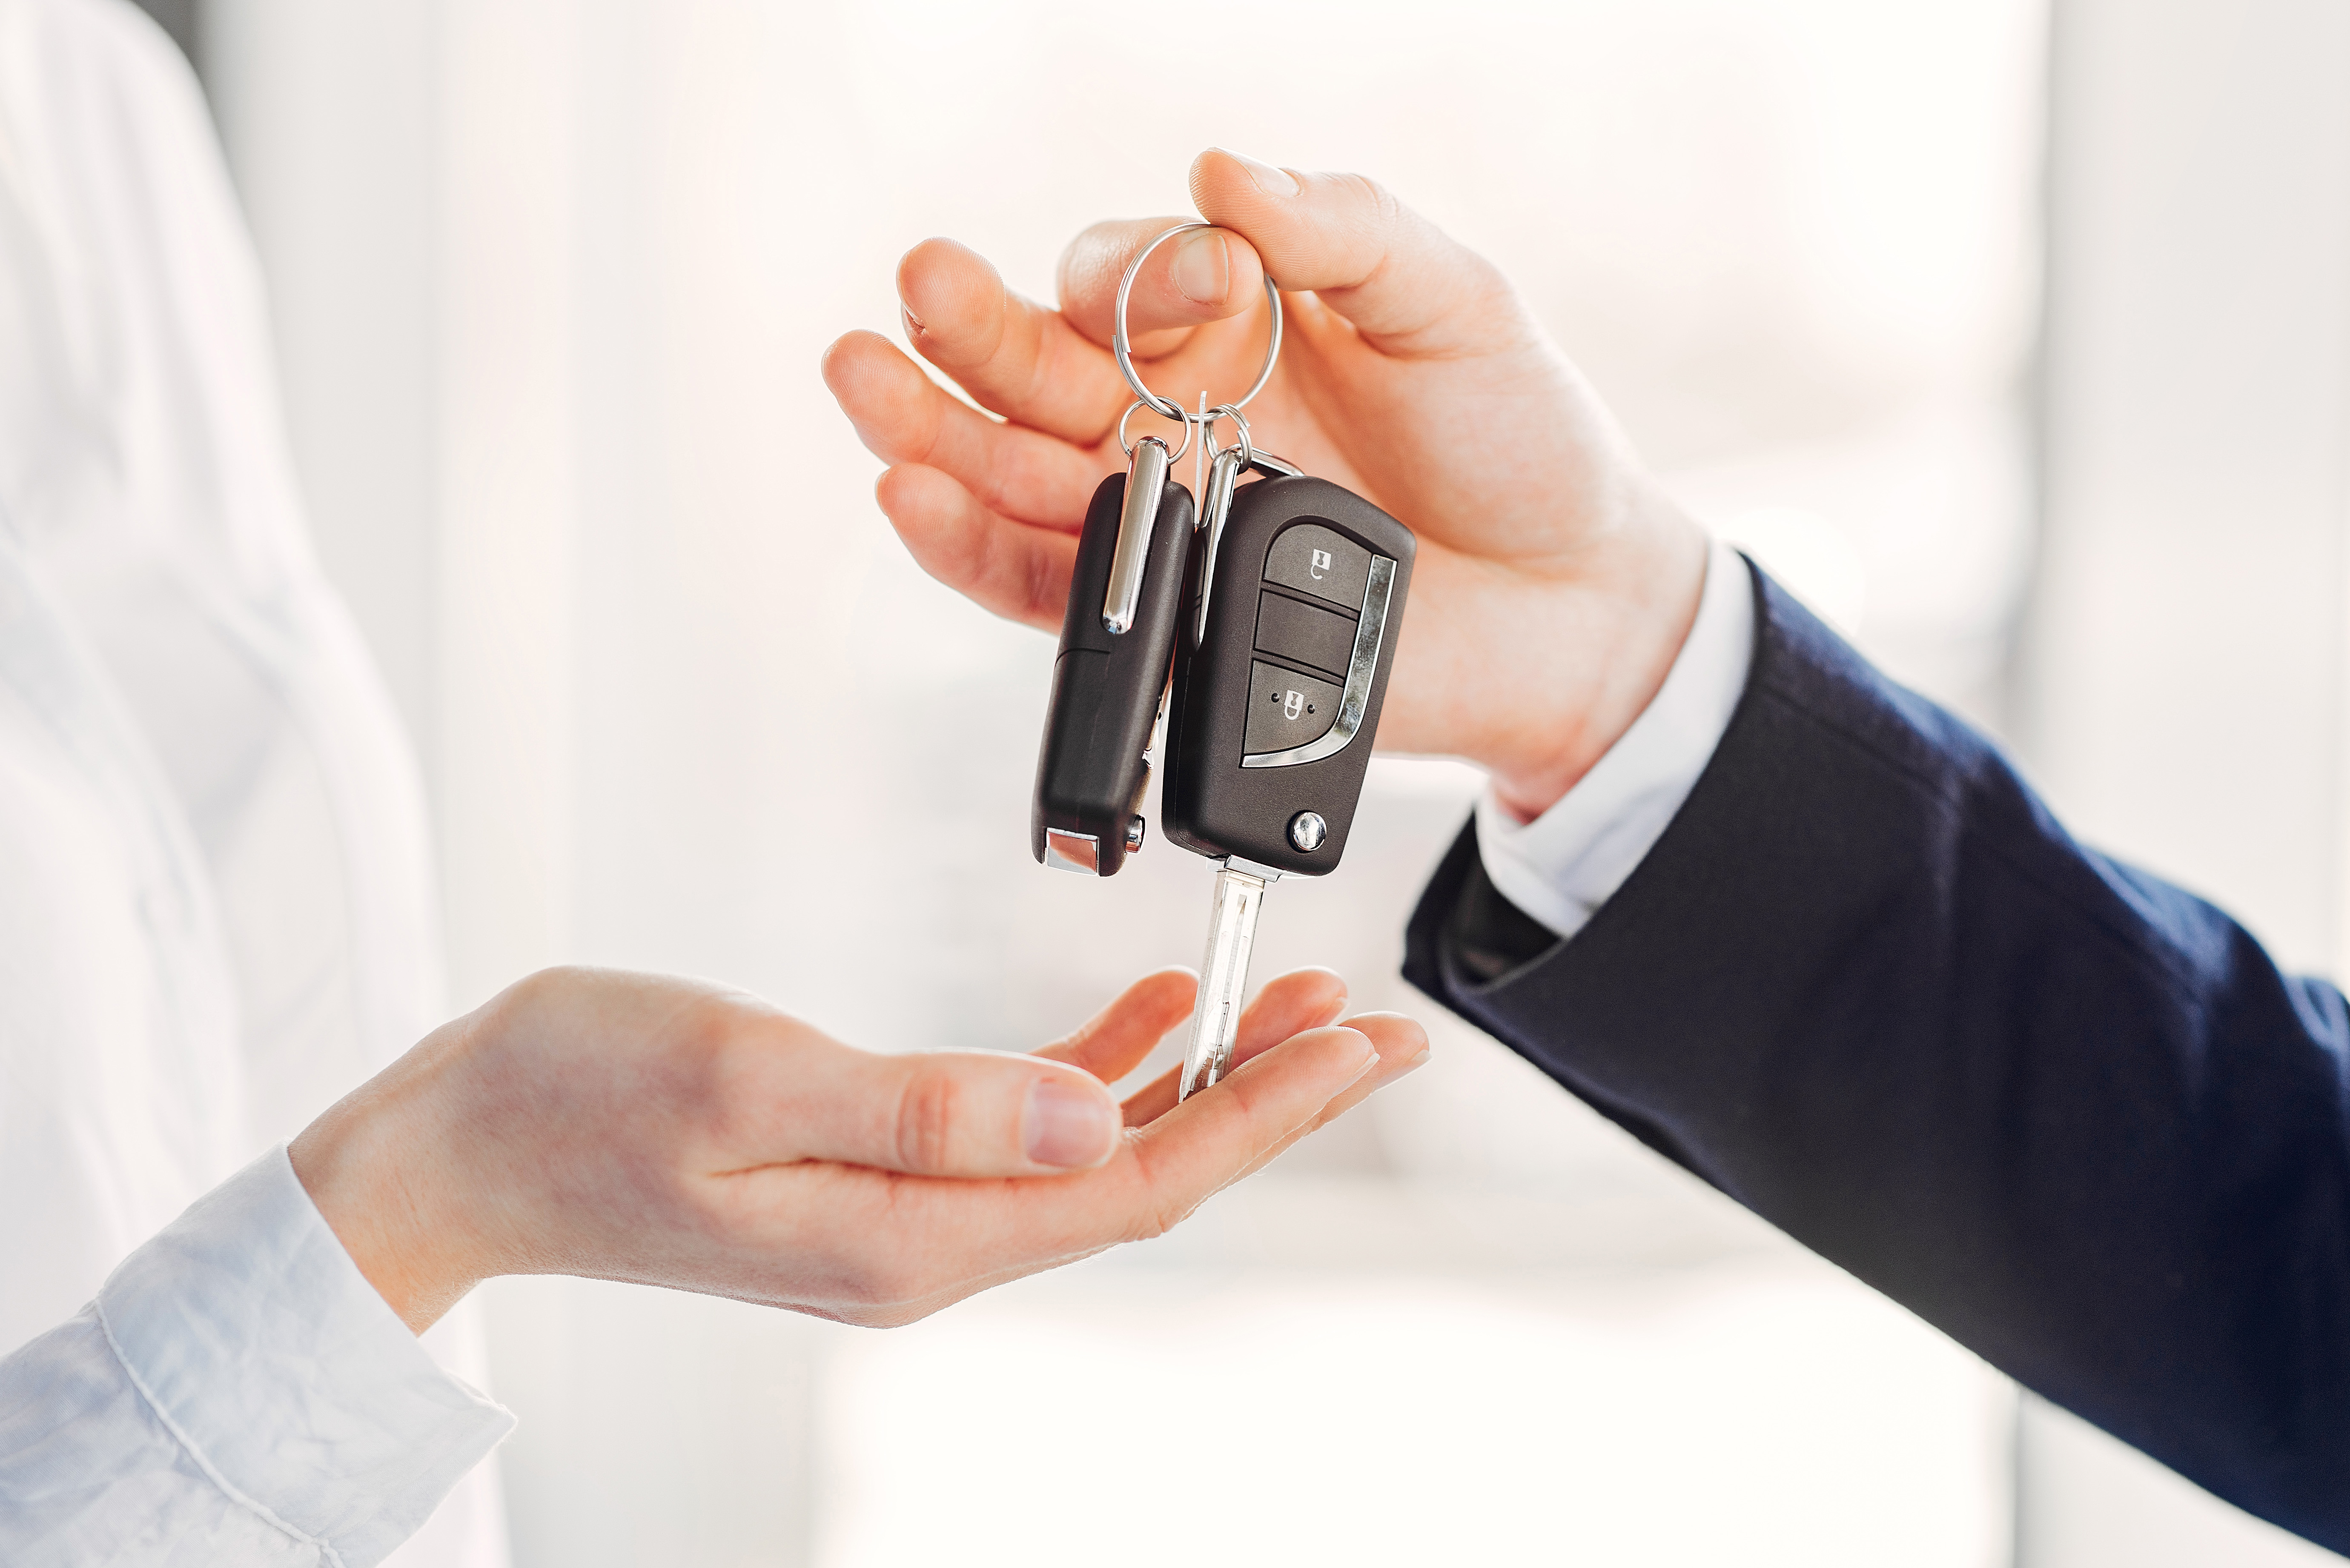 What To Do if Your Rental Car Has Met With An Accident